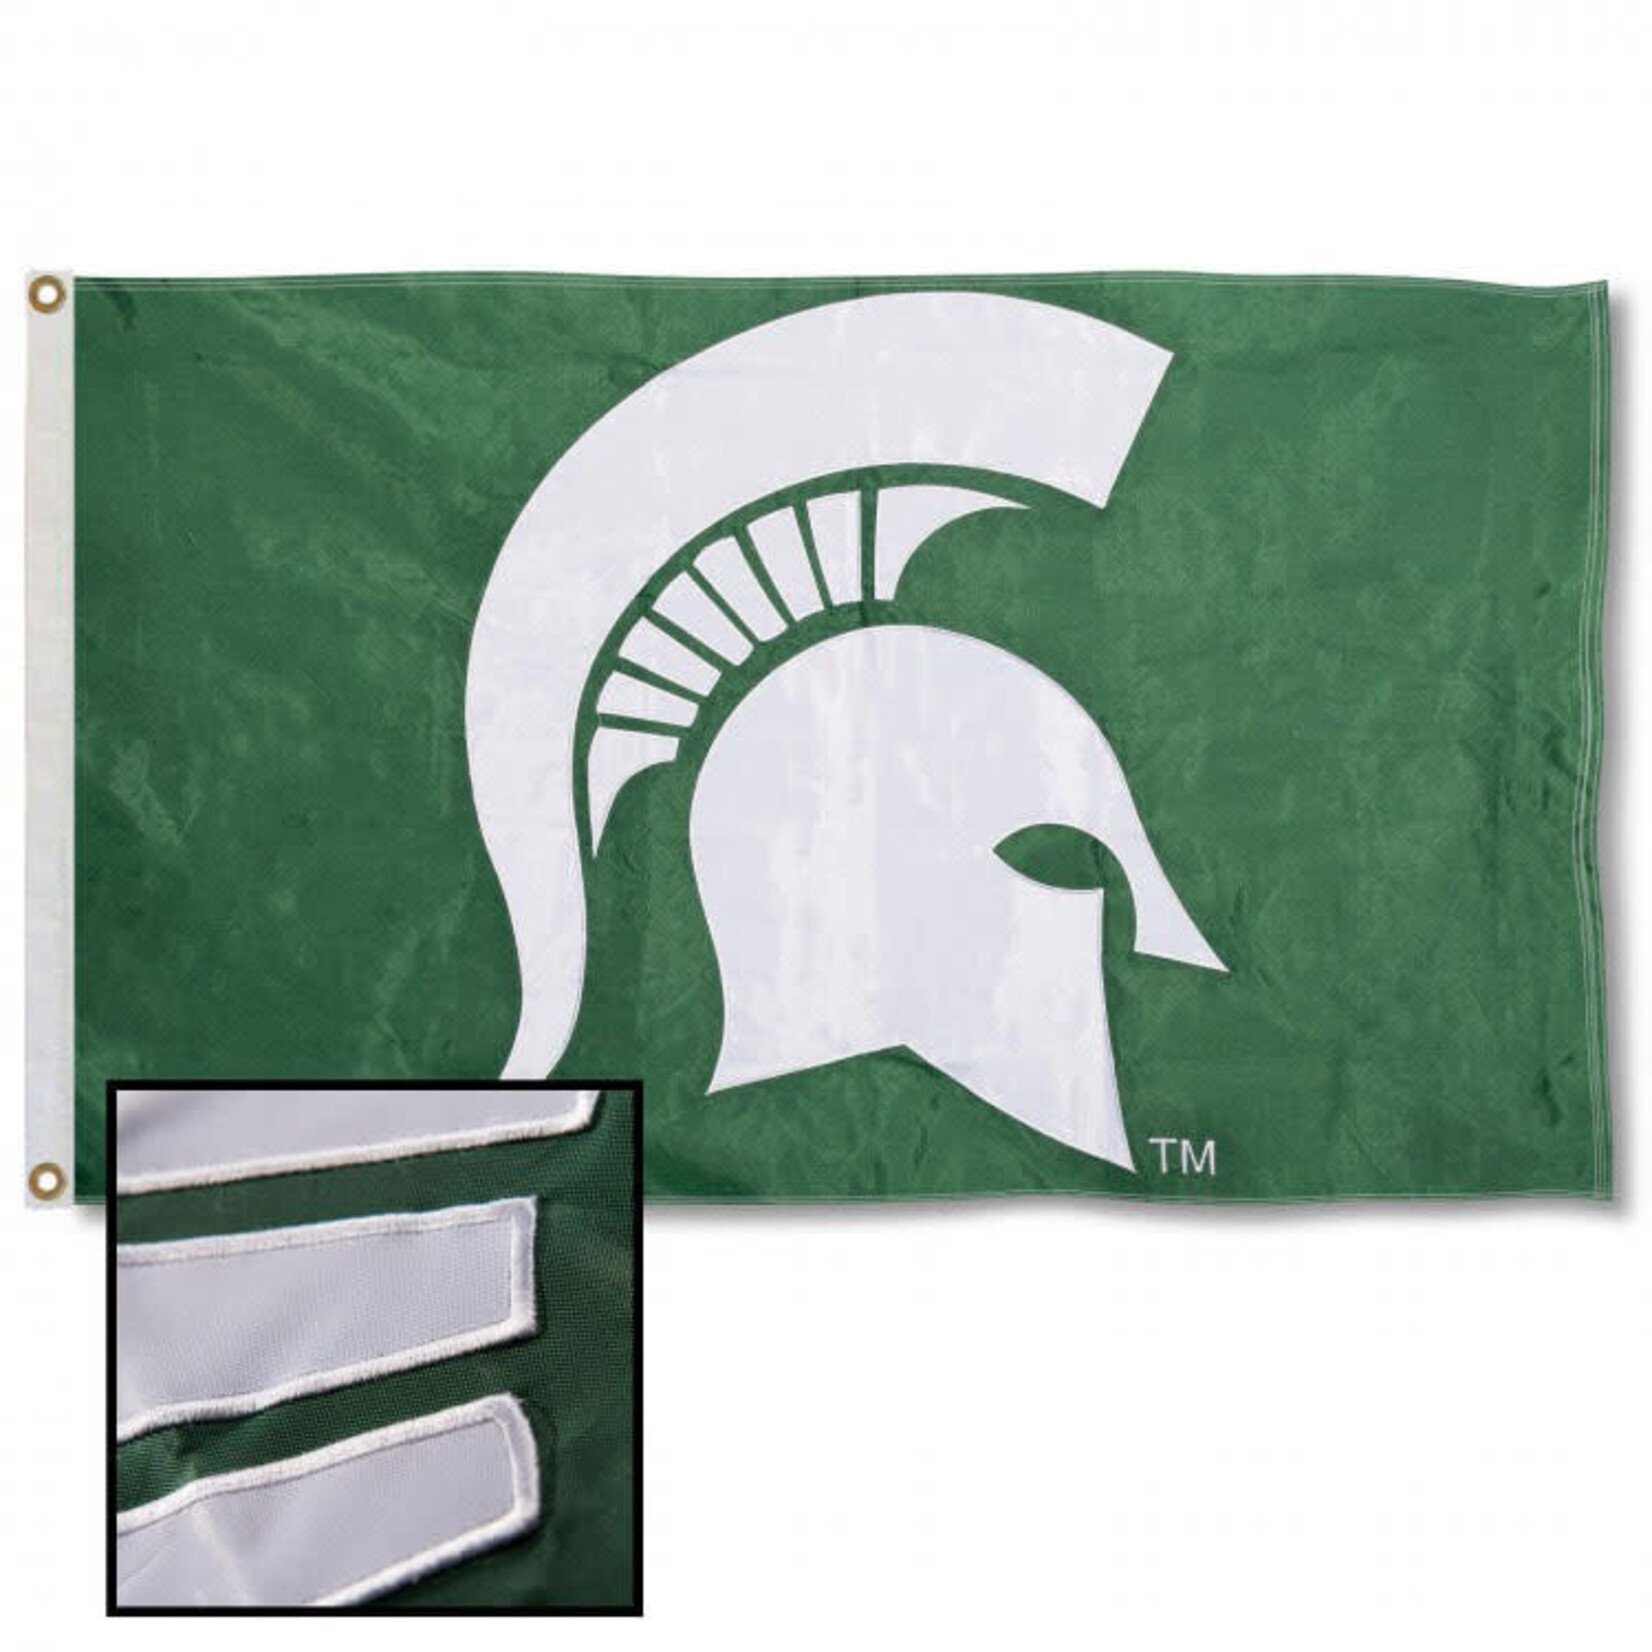 Sewing Concepts NCAA Michigan State University  Flag 3'x5' Applique Green w/White Spartan